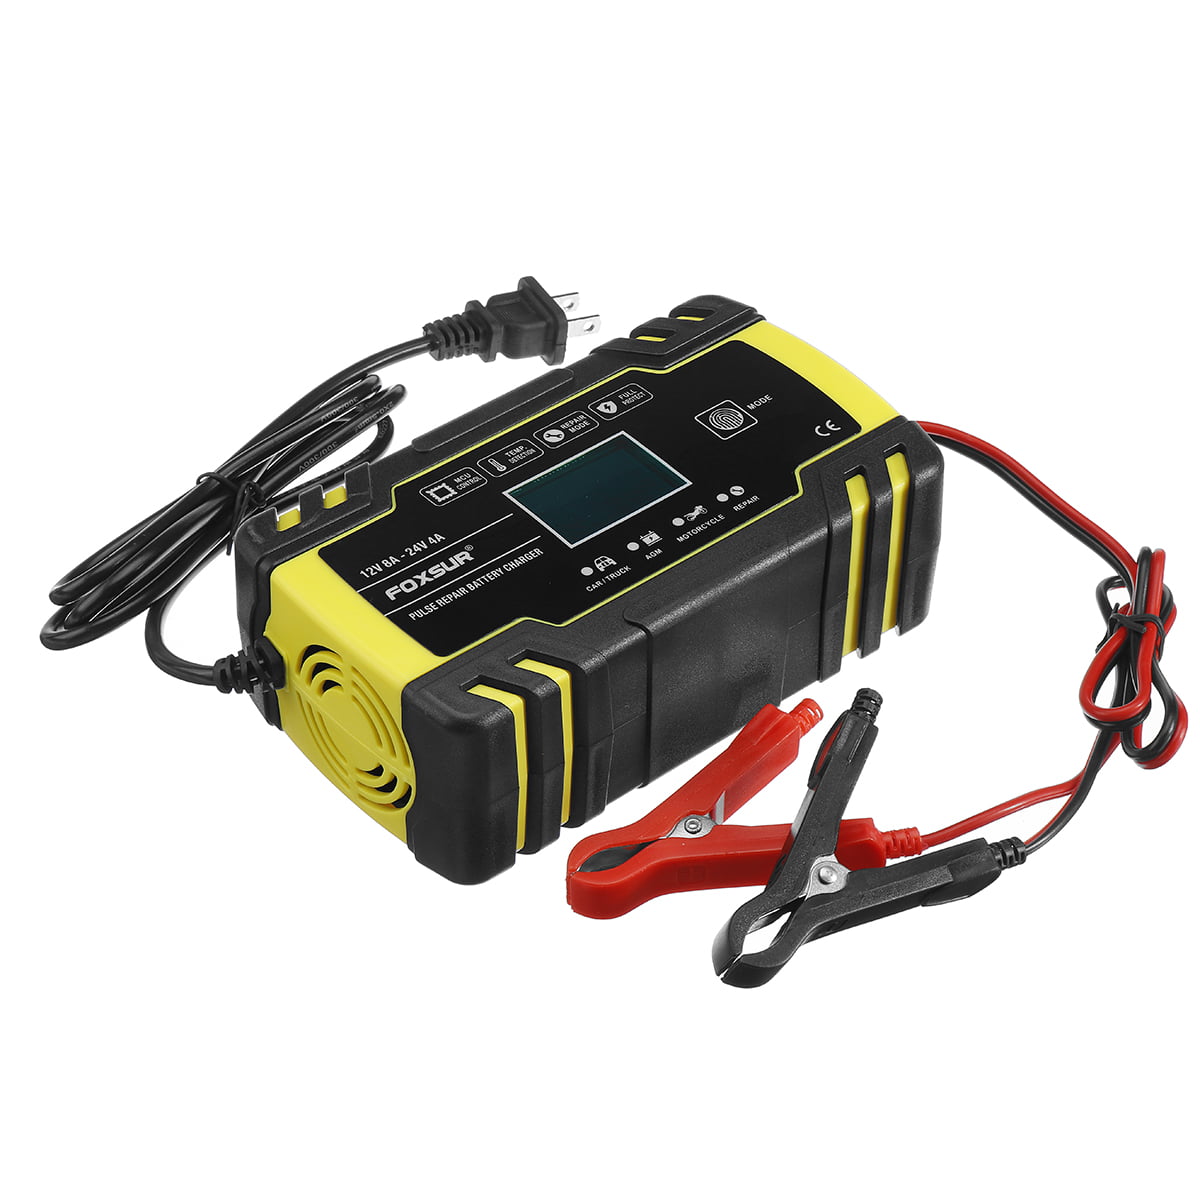 12V Battery Charger Amusement Charging And Repair Of Car And Motorcycle Batteries Fully Automatic Charger Optimum Charge